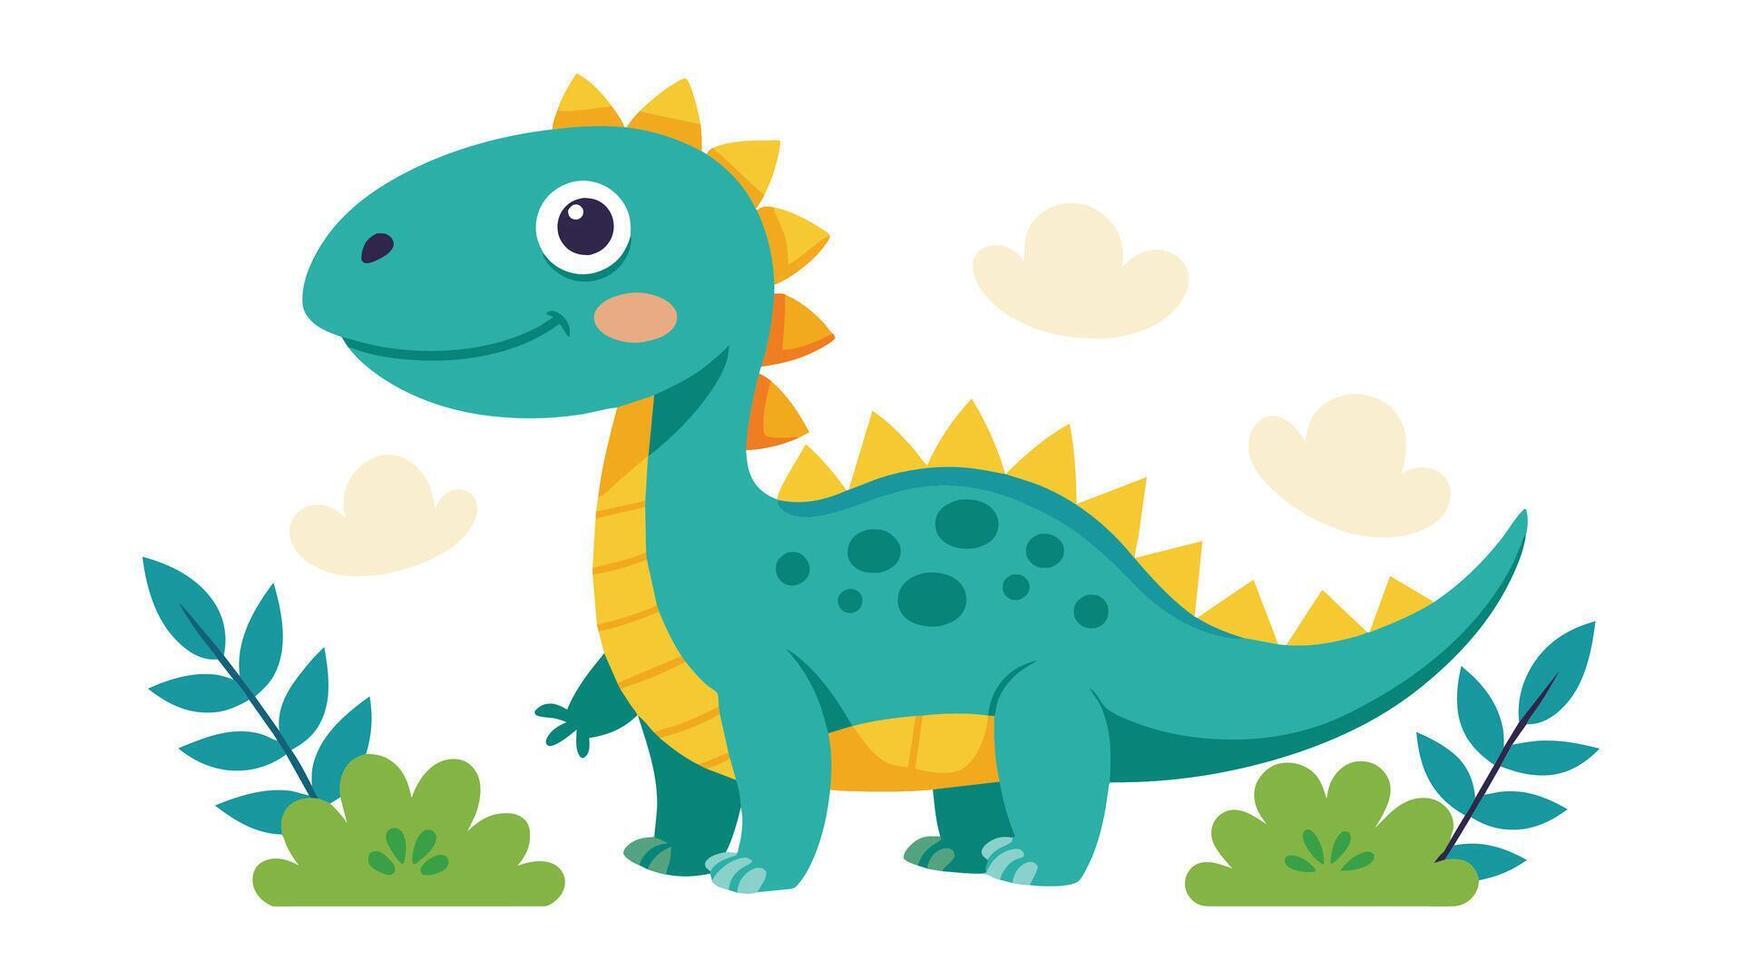 Cute Dinosaurs flat vector illustration on white background